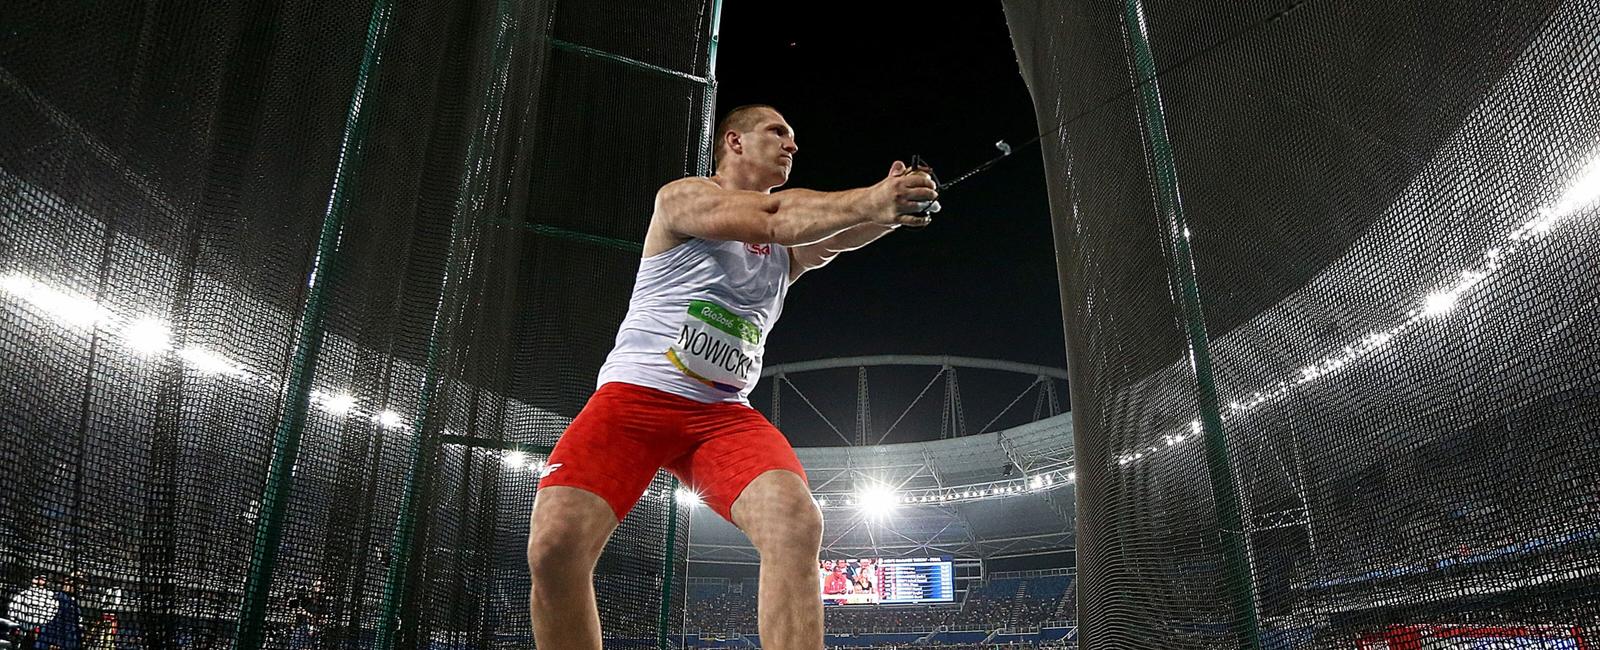 Rhode island is the only state which the hammer throw is a legal high school sport